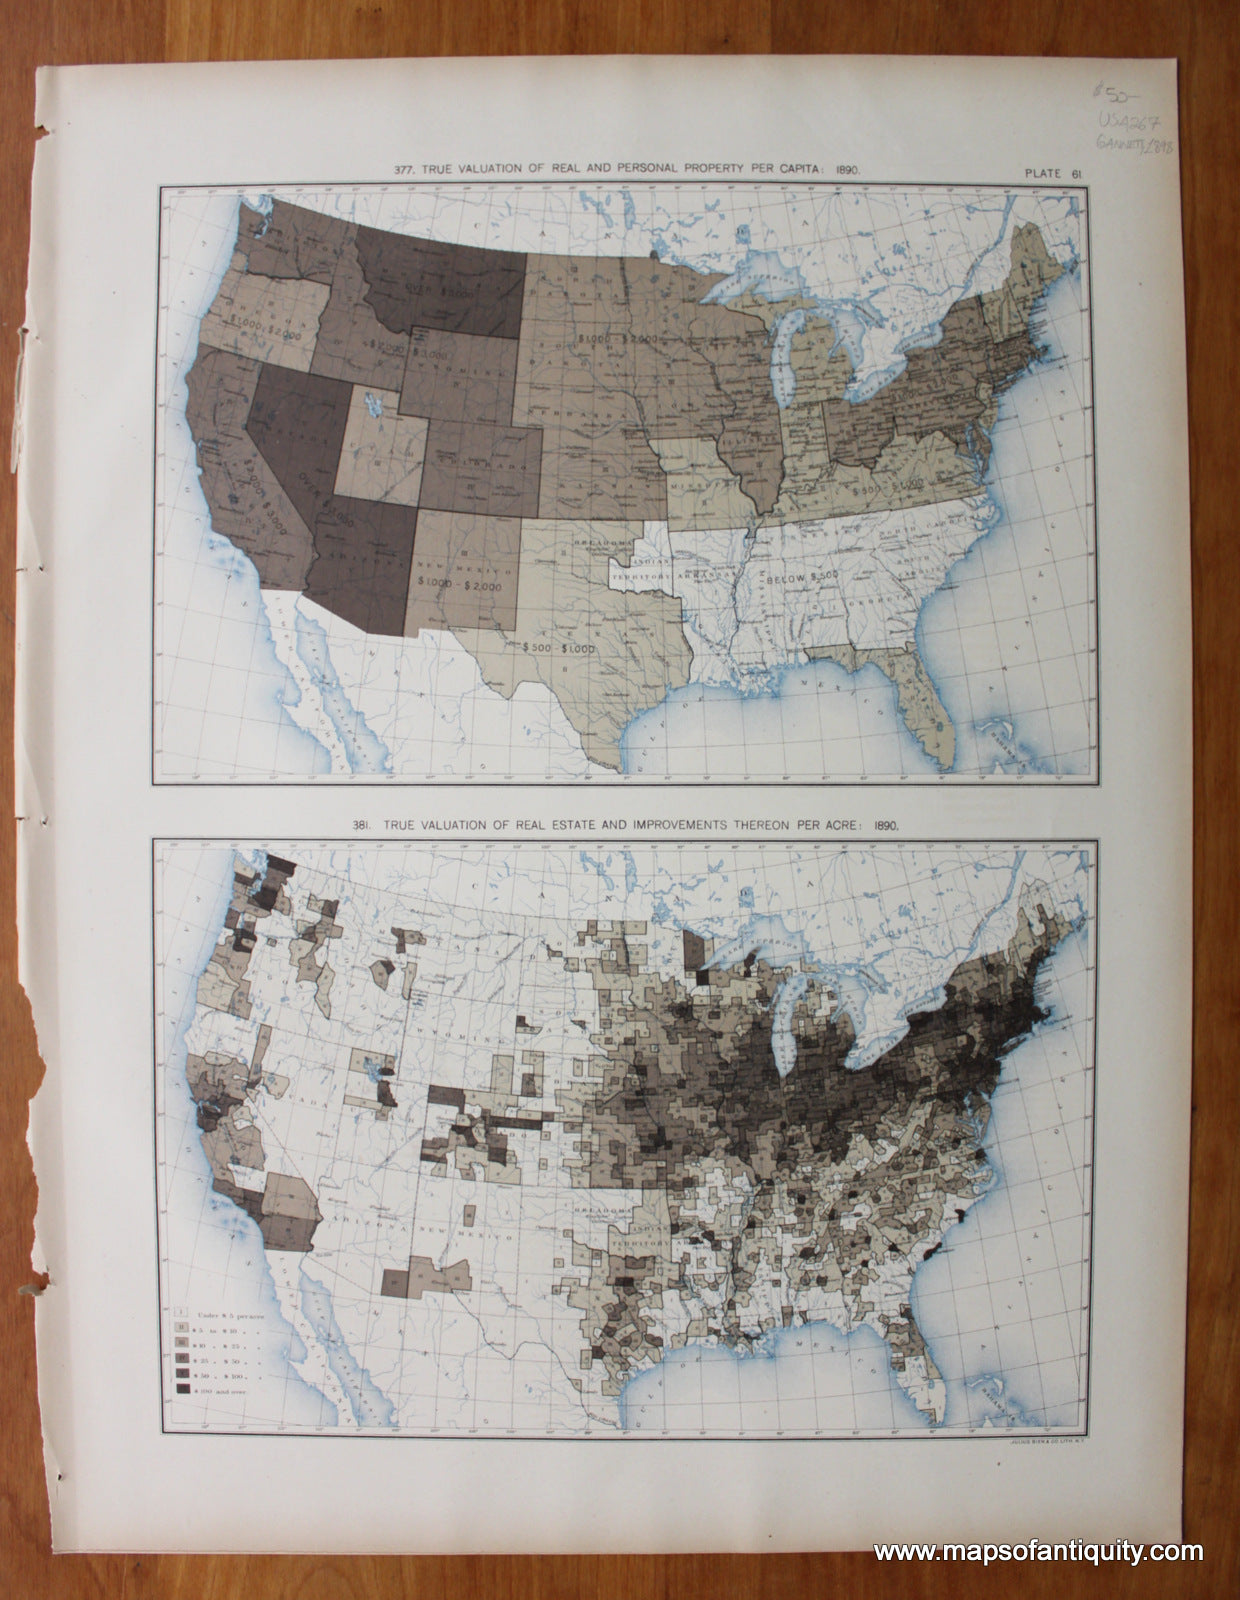 Antique-Printed-Color-Map-True-Valuation-of-Real-and-Personal-Property-Per-Capita:-1890/-True-Valuation-of-Real-Estate-and-Improvements-Thereon-Per-Acre:-1890-United-States-United-States-General-1898-Gannett-Maps-Of-Antiquity